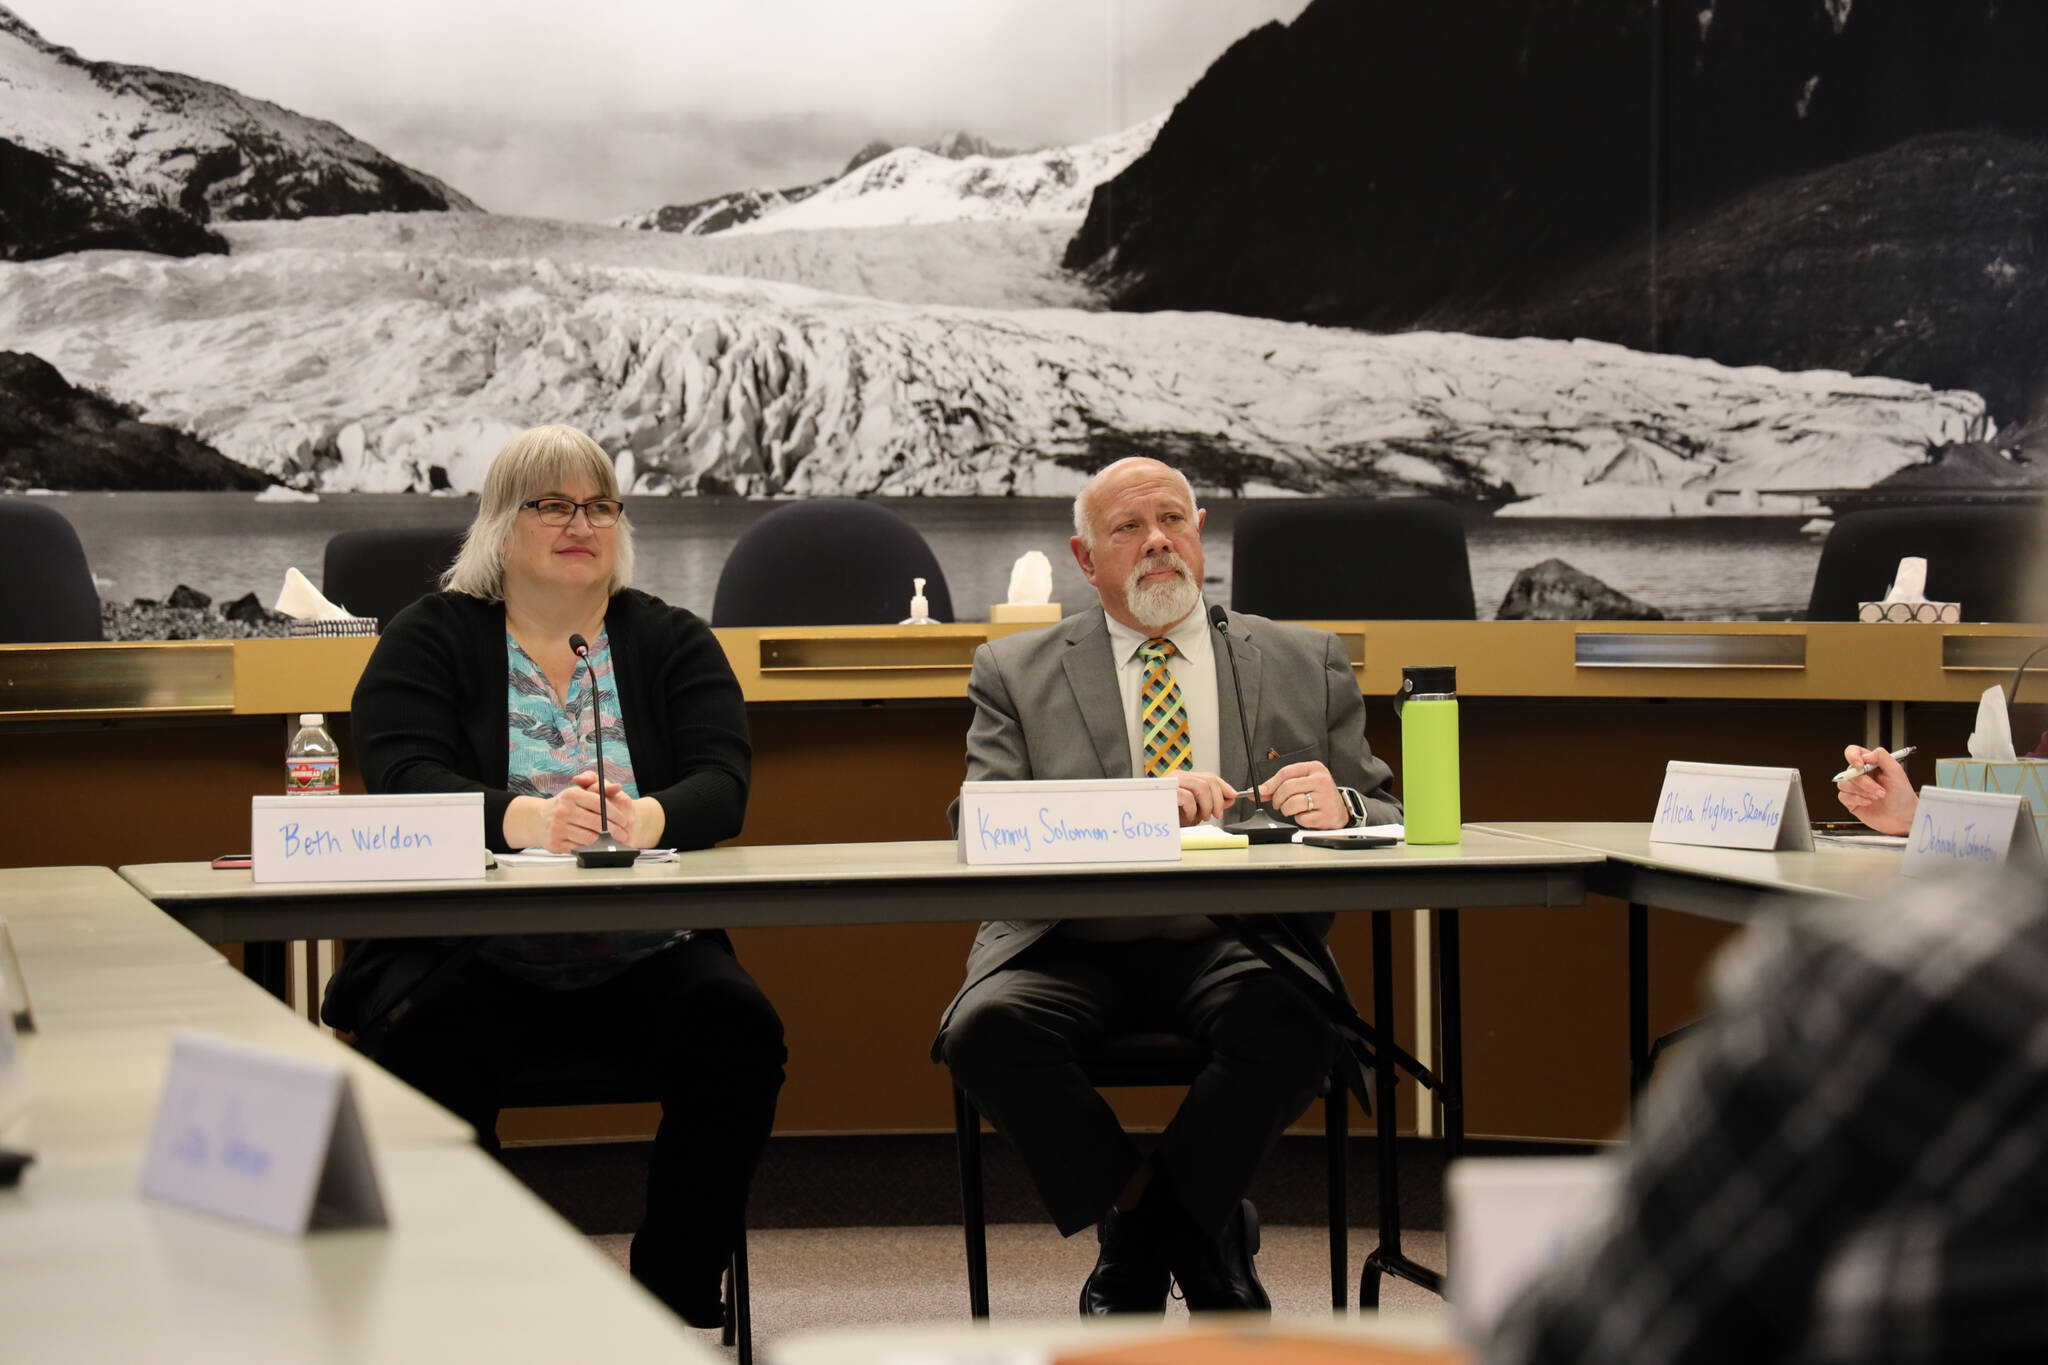 Clarise Larson / Juneau Empire 
City and Borough of Juneau Mayor Beth Weldon and Bartlett Regional Hospital Board President Kenny Solomon-Gross sit next to each other during a joint meeting between the Assembly and hospital’s senior leadership team and board to discuss the hospital’s current multi-million dollar deficit and financial state.